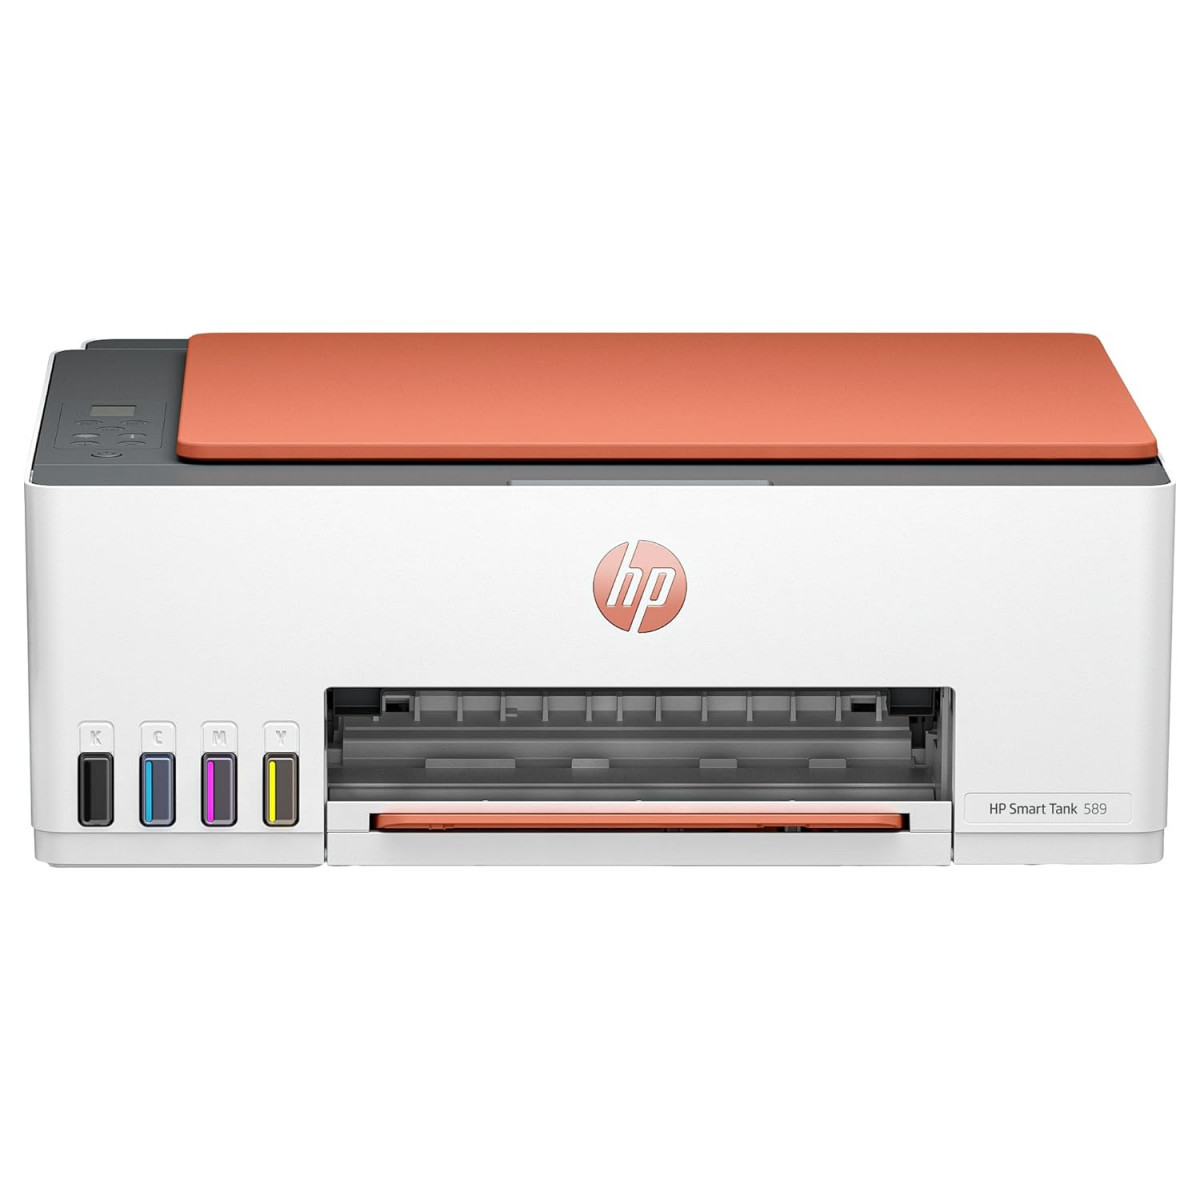 HP Smart Tank 589 AIO WiFi Colour Printer (Upto 6000 Black & 6000 Colour Pages Included in The Box). - Print, Scan & Copy for Office/Home